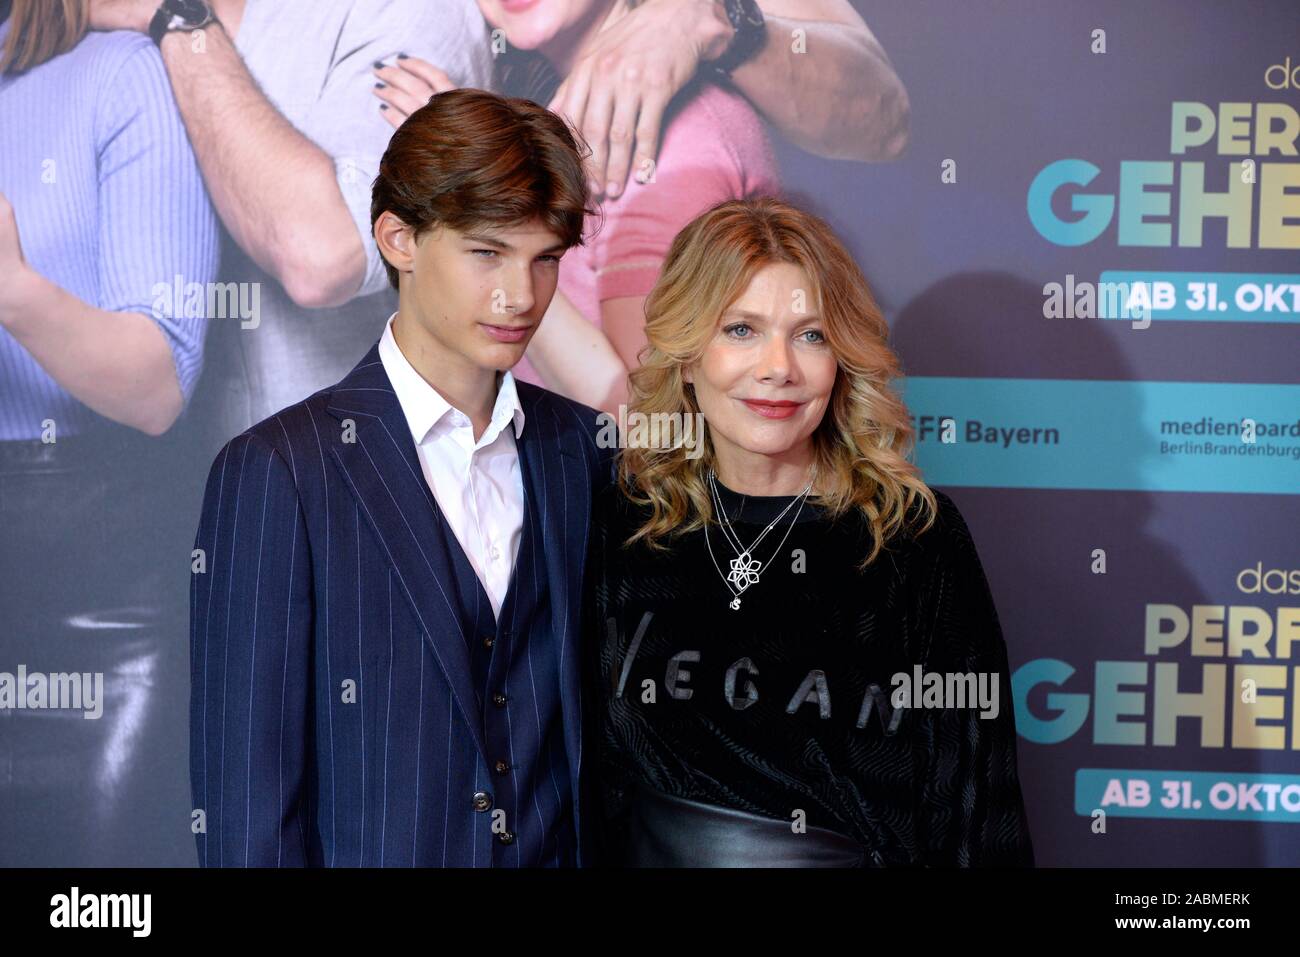 Actress Ursula Karven and son Liam Karven-Veres at the premiere of the movie 'Das perfekte Geheimnis' at the Mathäser Kino in Munich. [automated translation] Stock Photo